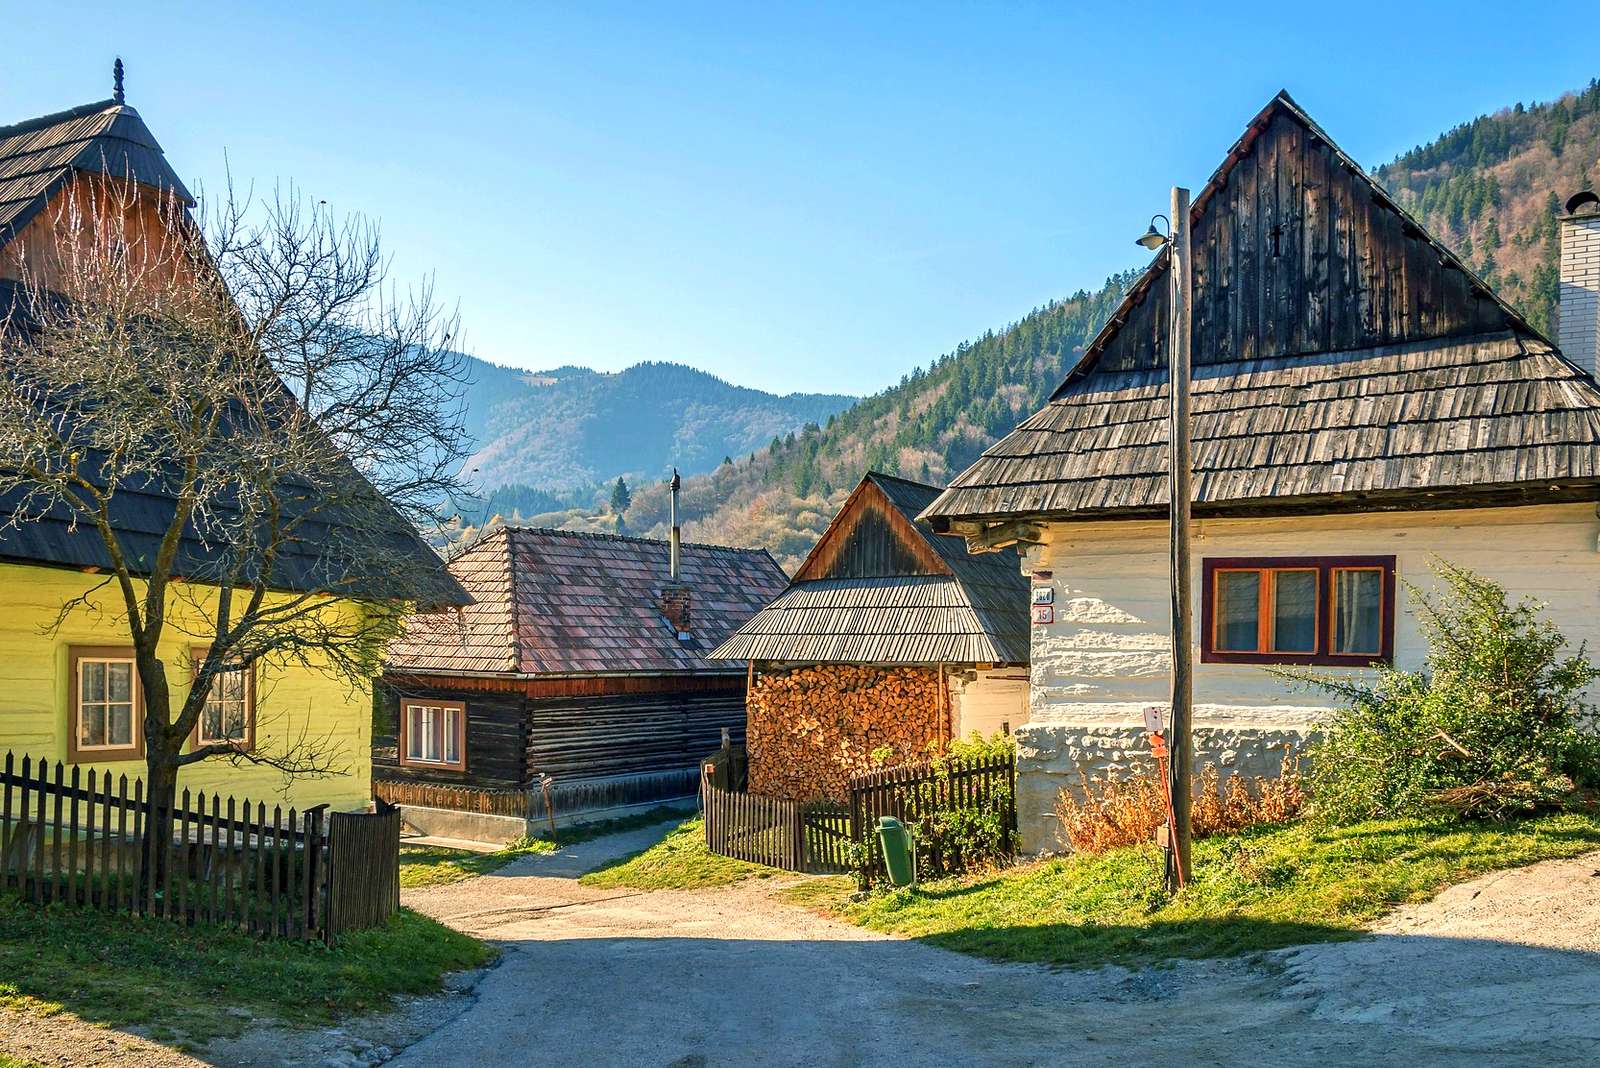 VLKOLINEC - a residential open-air museum in Slovakia online puzzle